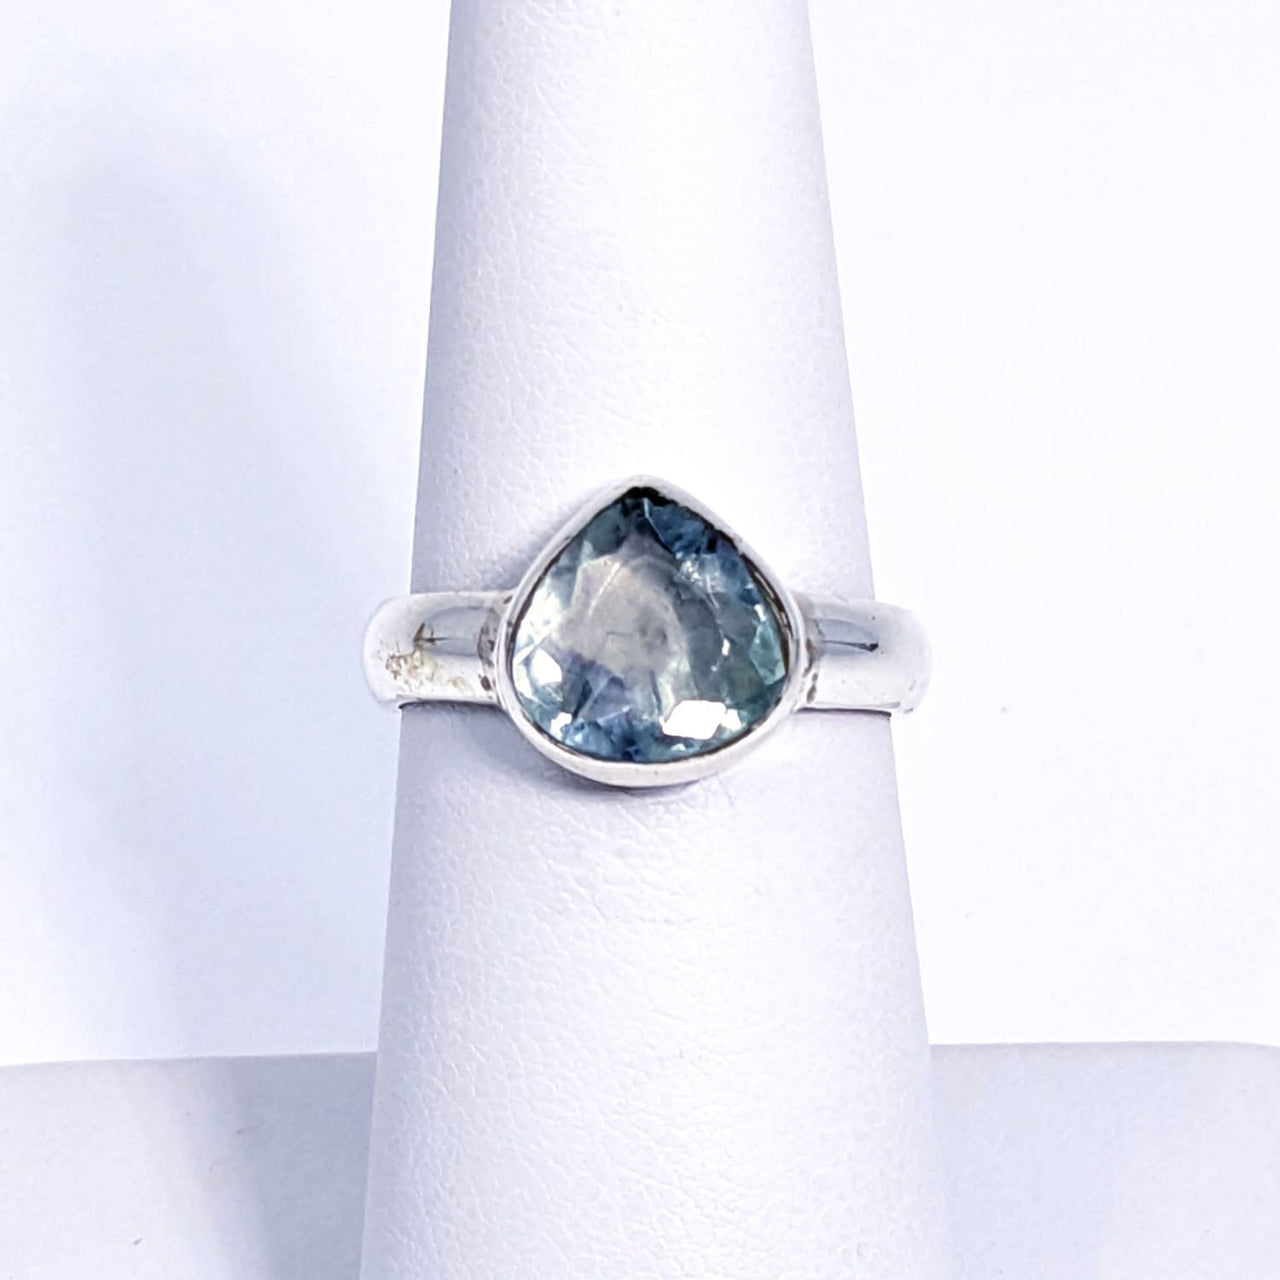 Blue Fluorite Faceted Ring Sz 5.75 #SK9149 - $69